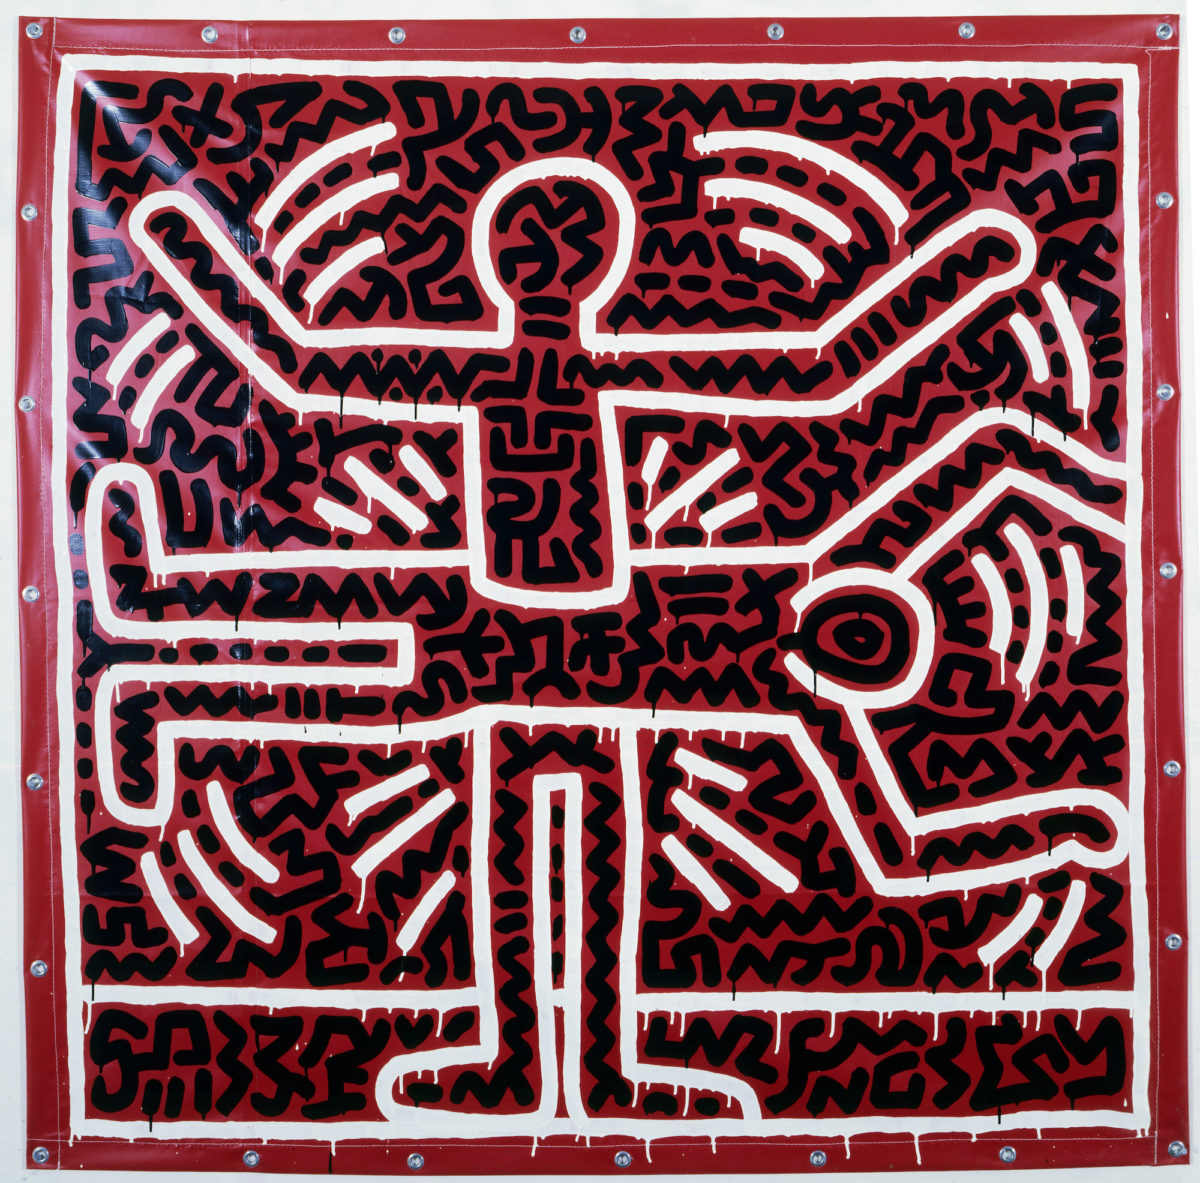 Keith Haring, Untitled 1983 [X74582]